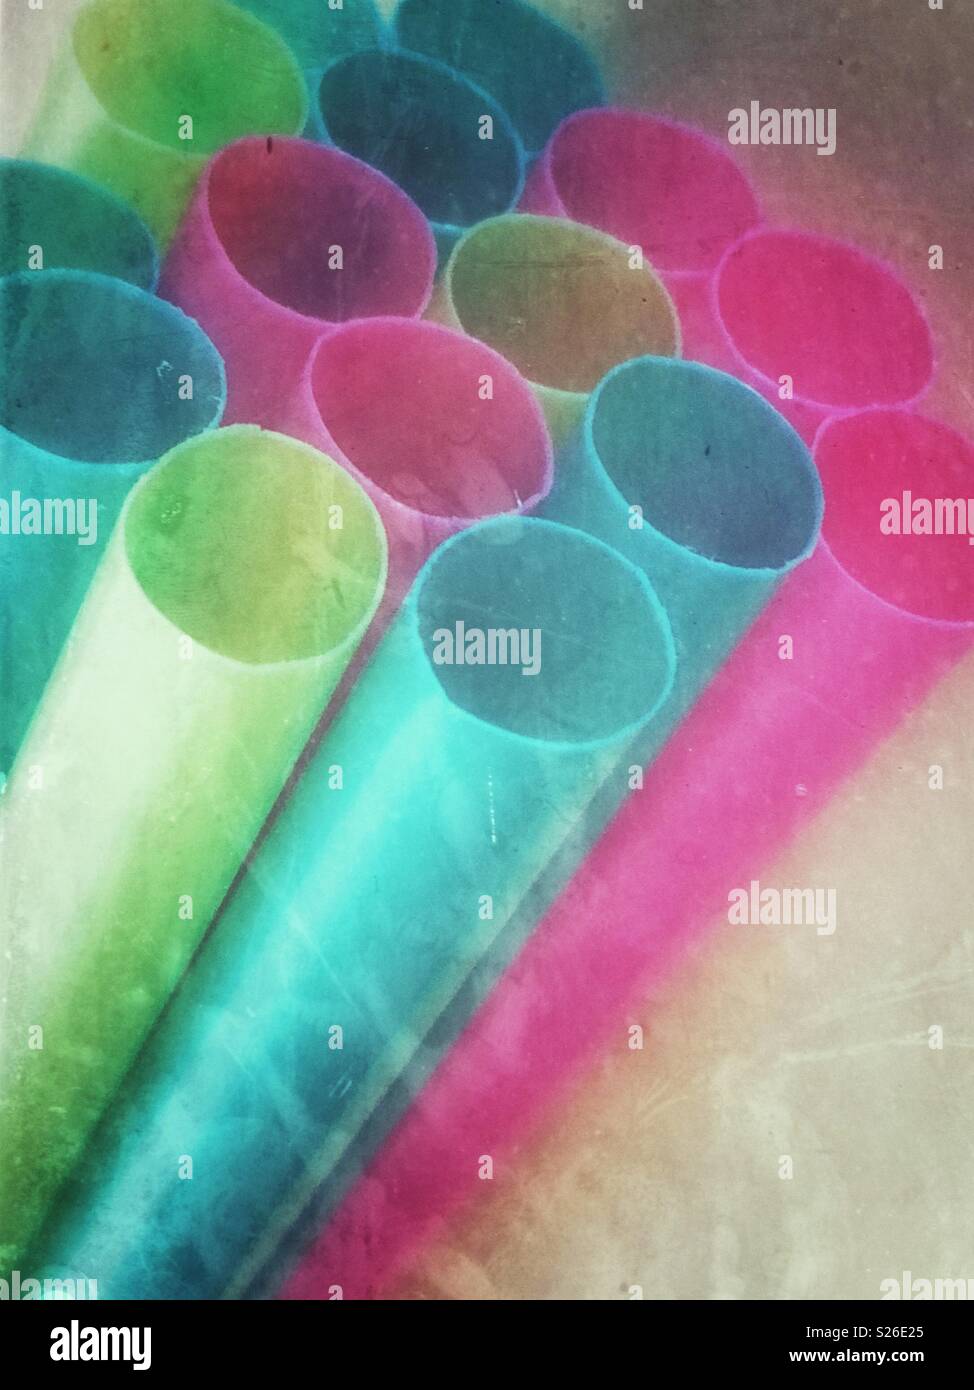 Closeup image of coloured plastic drinking straws with a foggy grunge effect Stock Photo